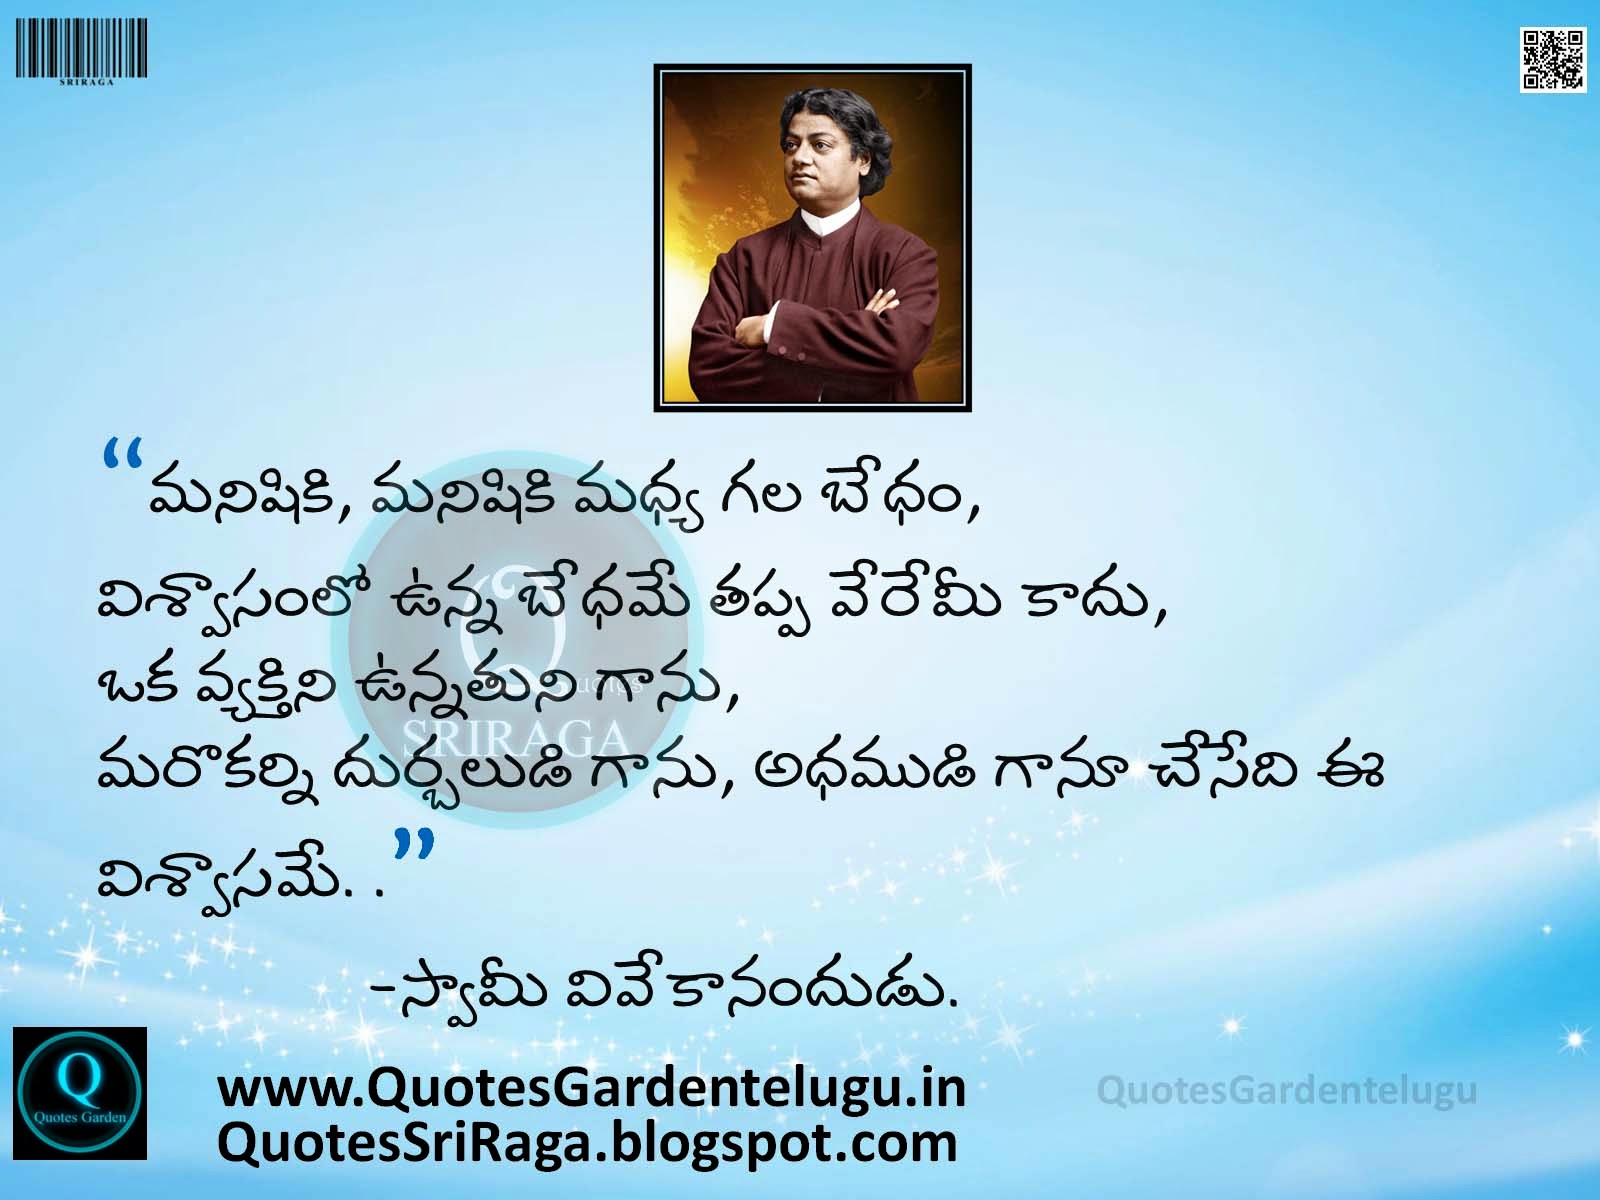 Vivekananda telugu quotes - Vivekananda Best Inpsirational quotes - Good Reads Vivekananda Best top Inspirational famous Quotes vivekananda Best quotes with images with hd wallpapers